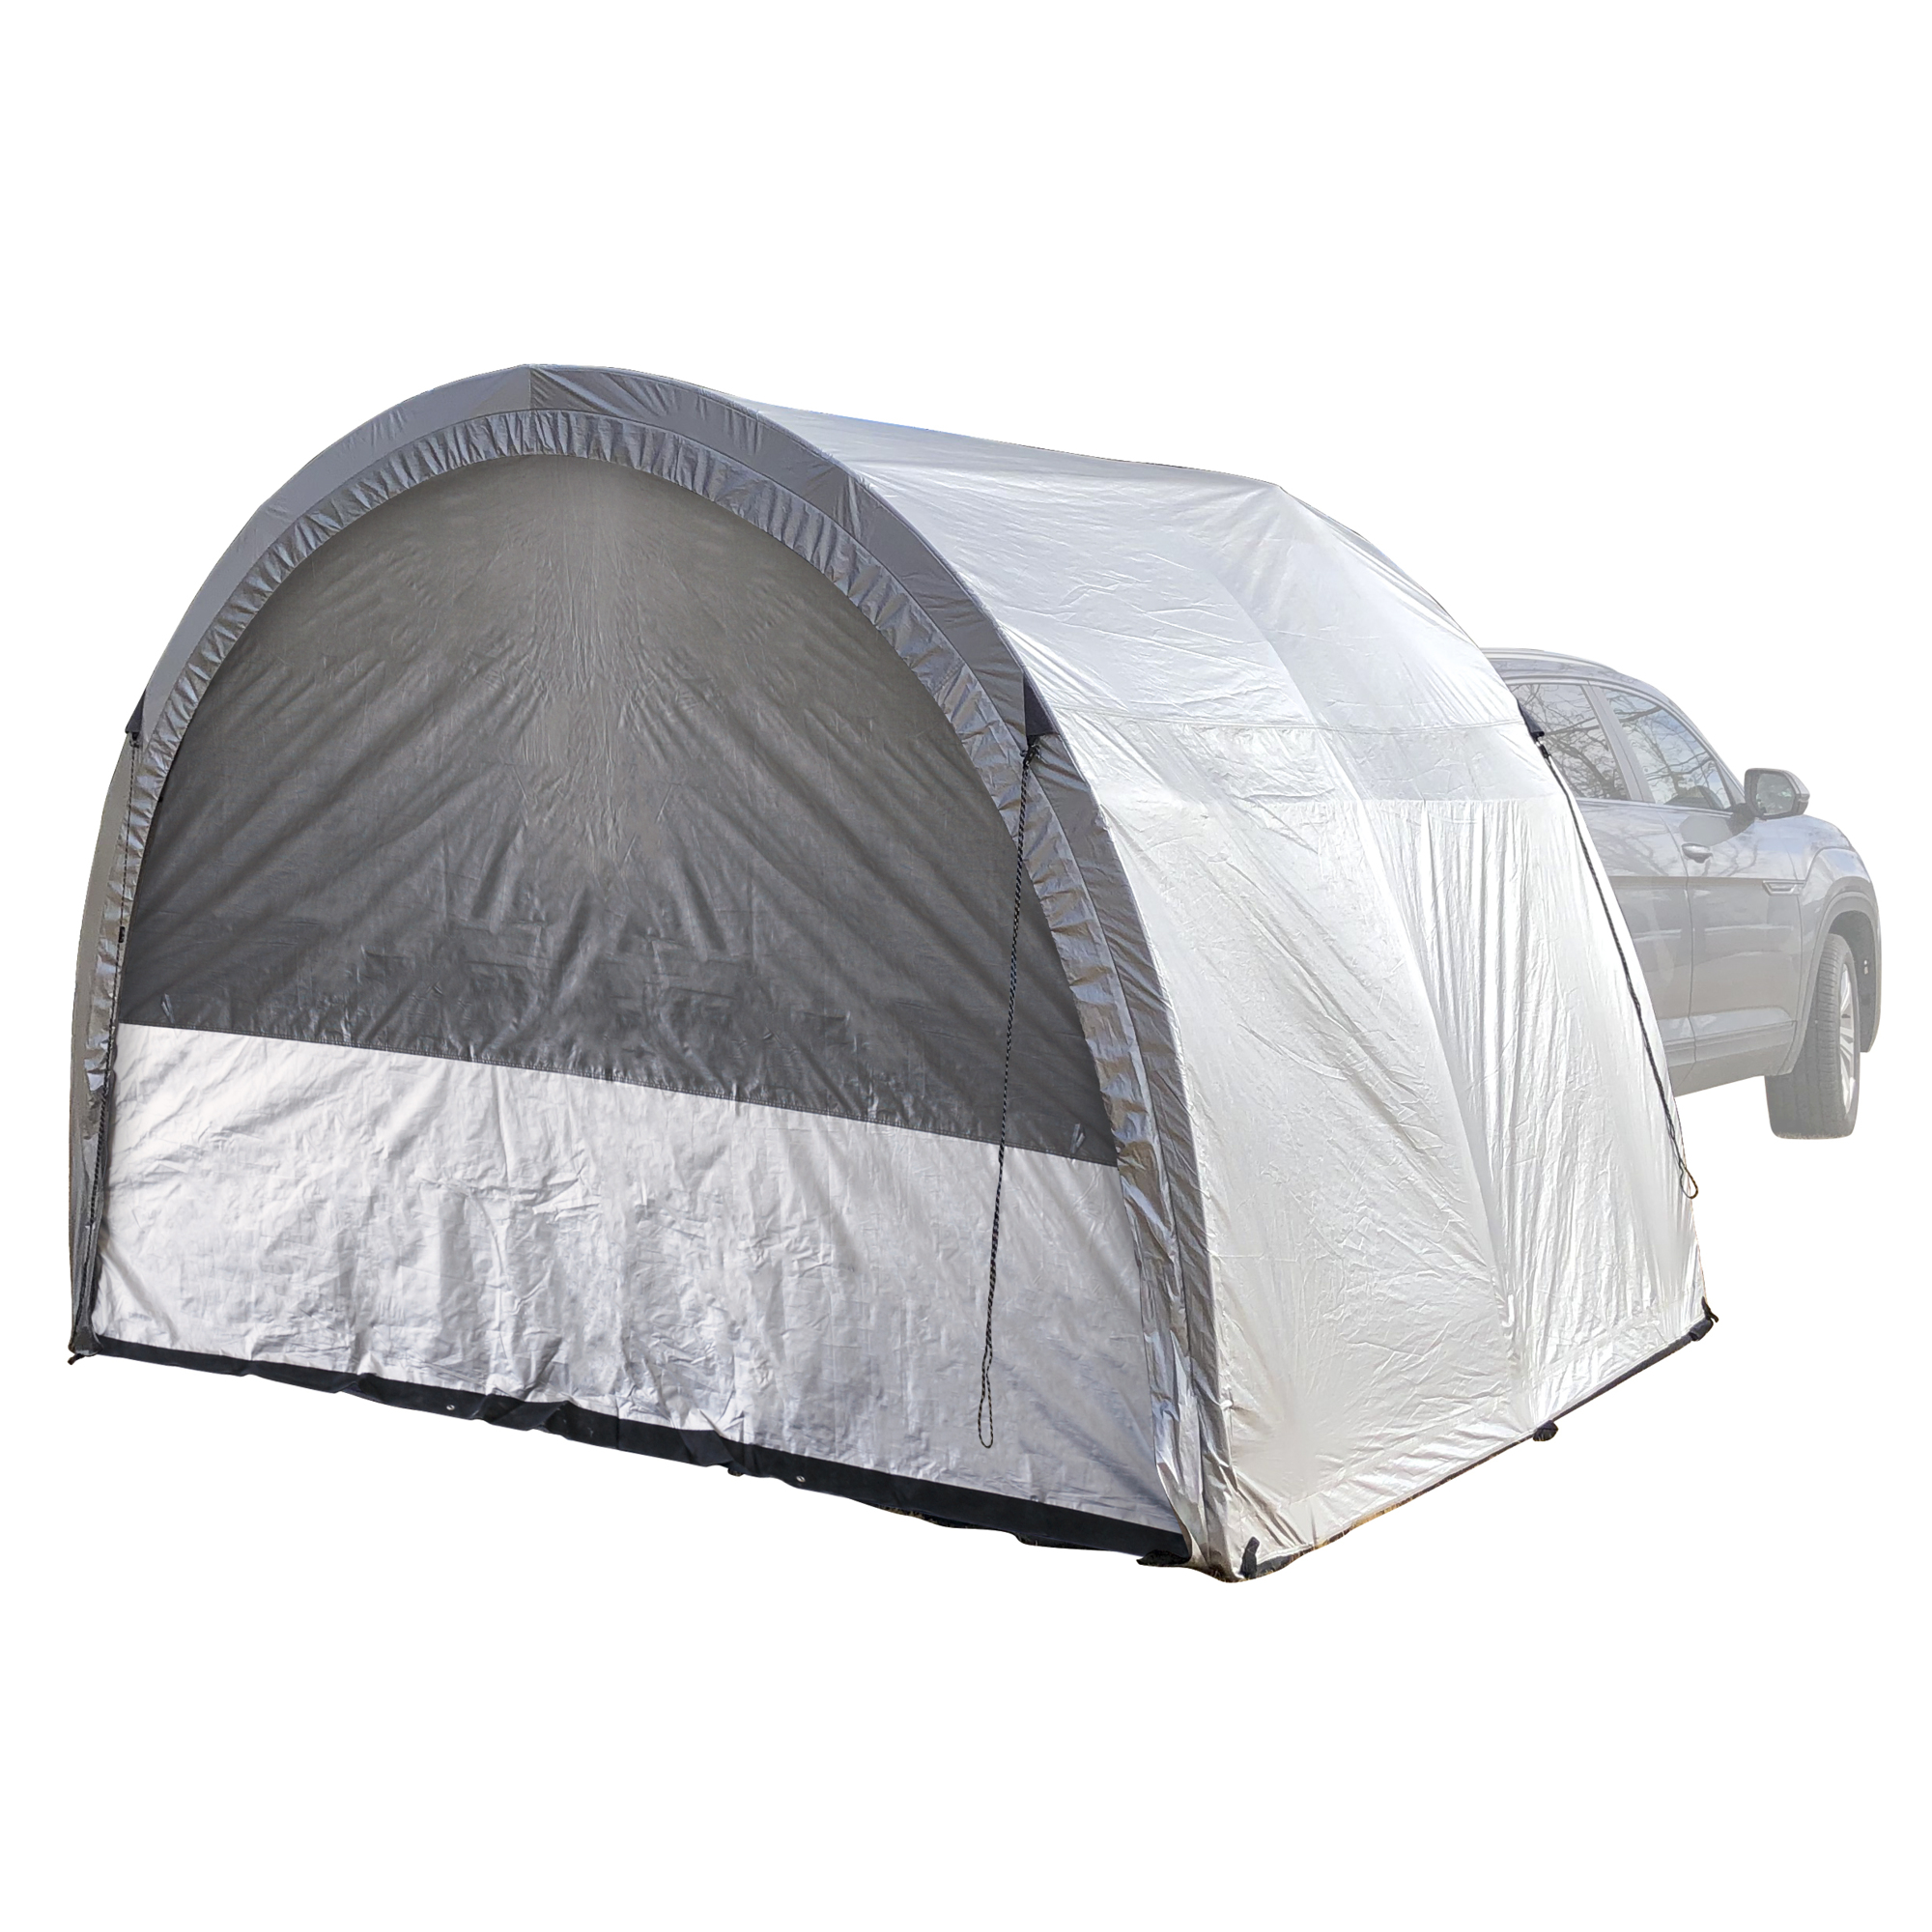 Let's Go Aero, Moon Unit Overland Shelter and Tailgate Tent, Length 10 ft, Width 8 ft, Color Silver, Model ARC02226